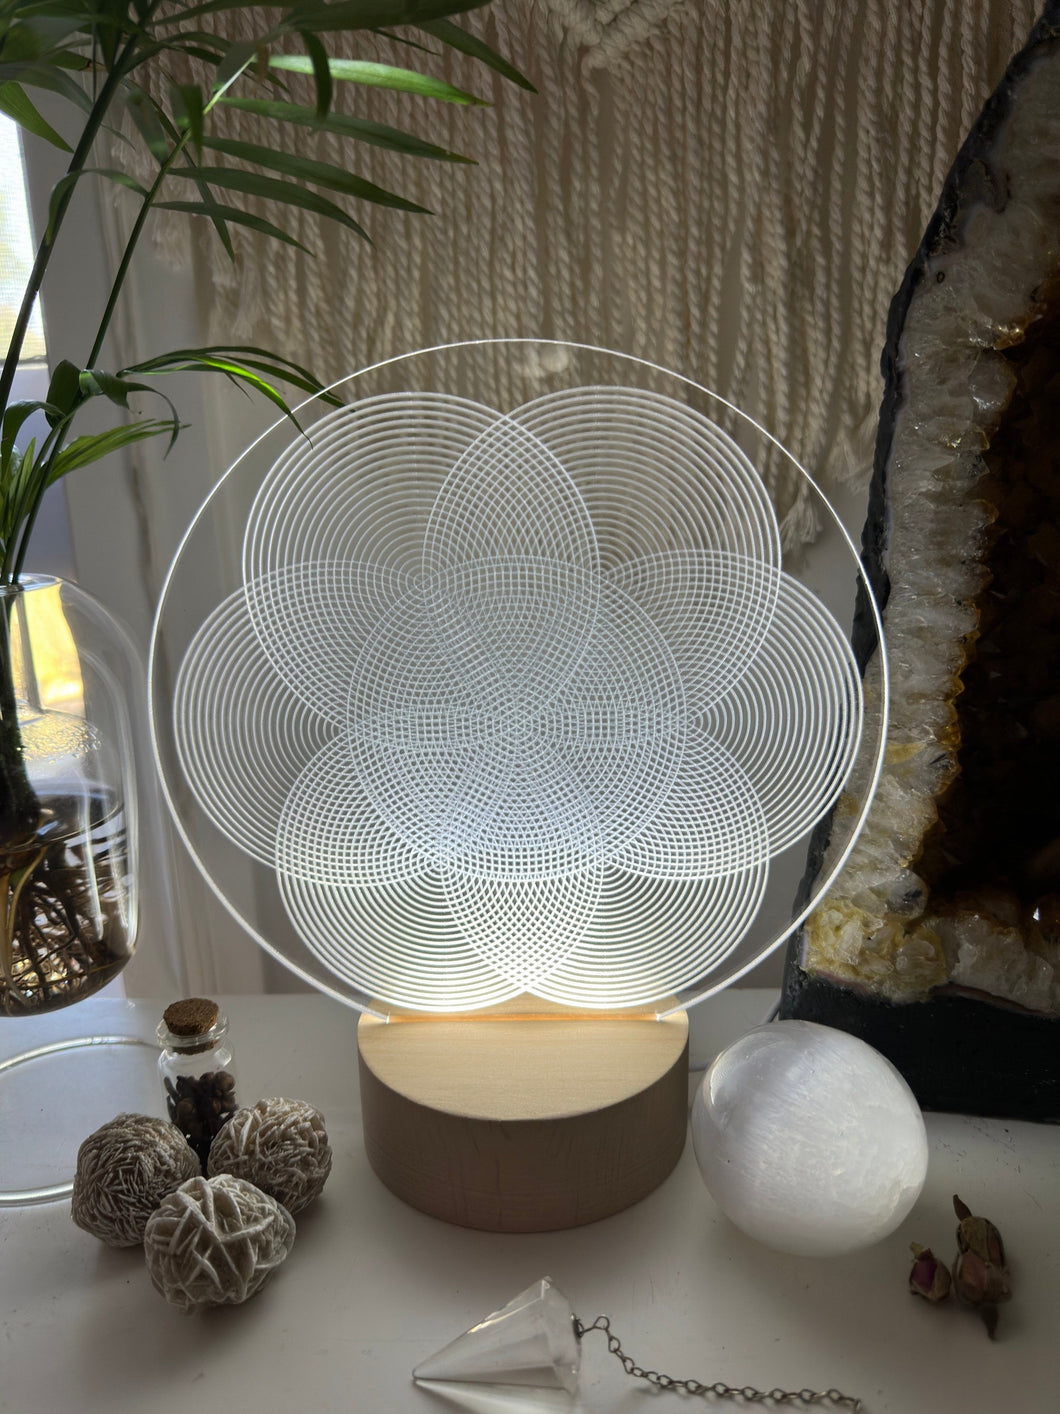 Variation of Flower of life vibrational layers - Small wooden led light base - universal usb connections